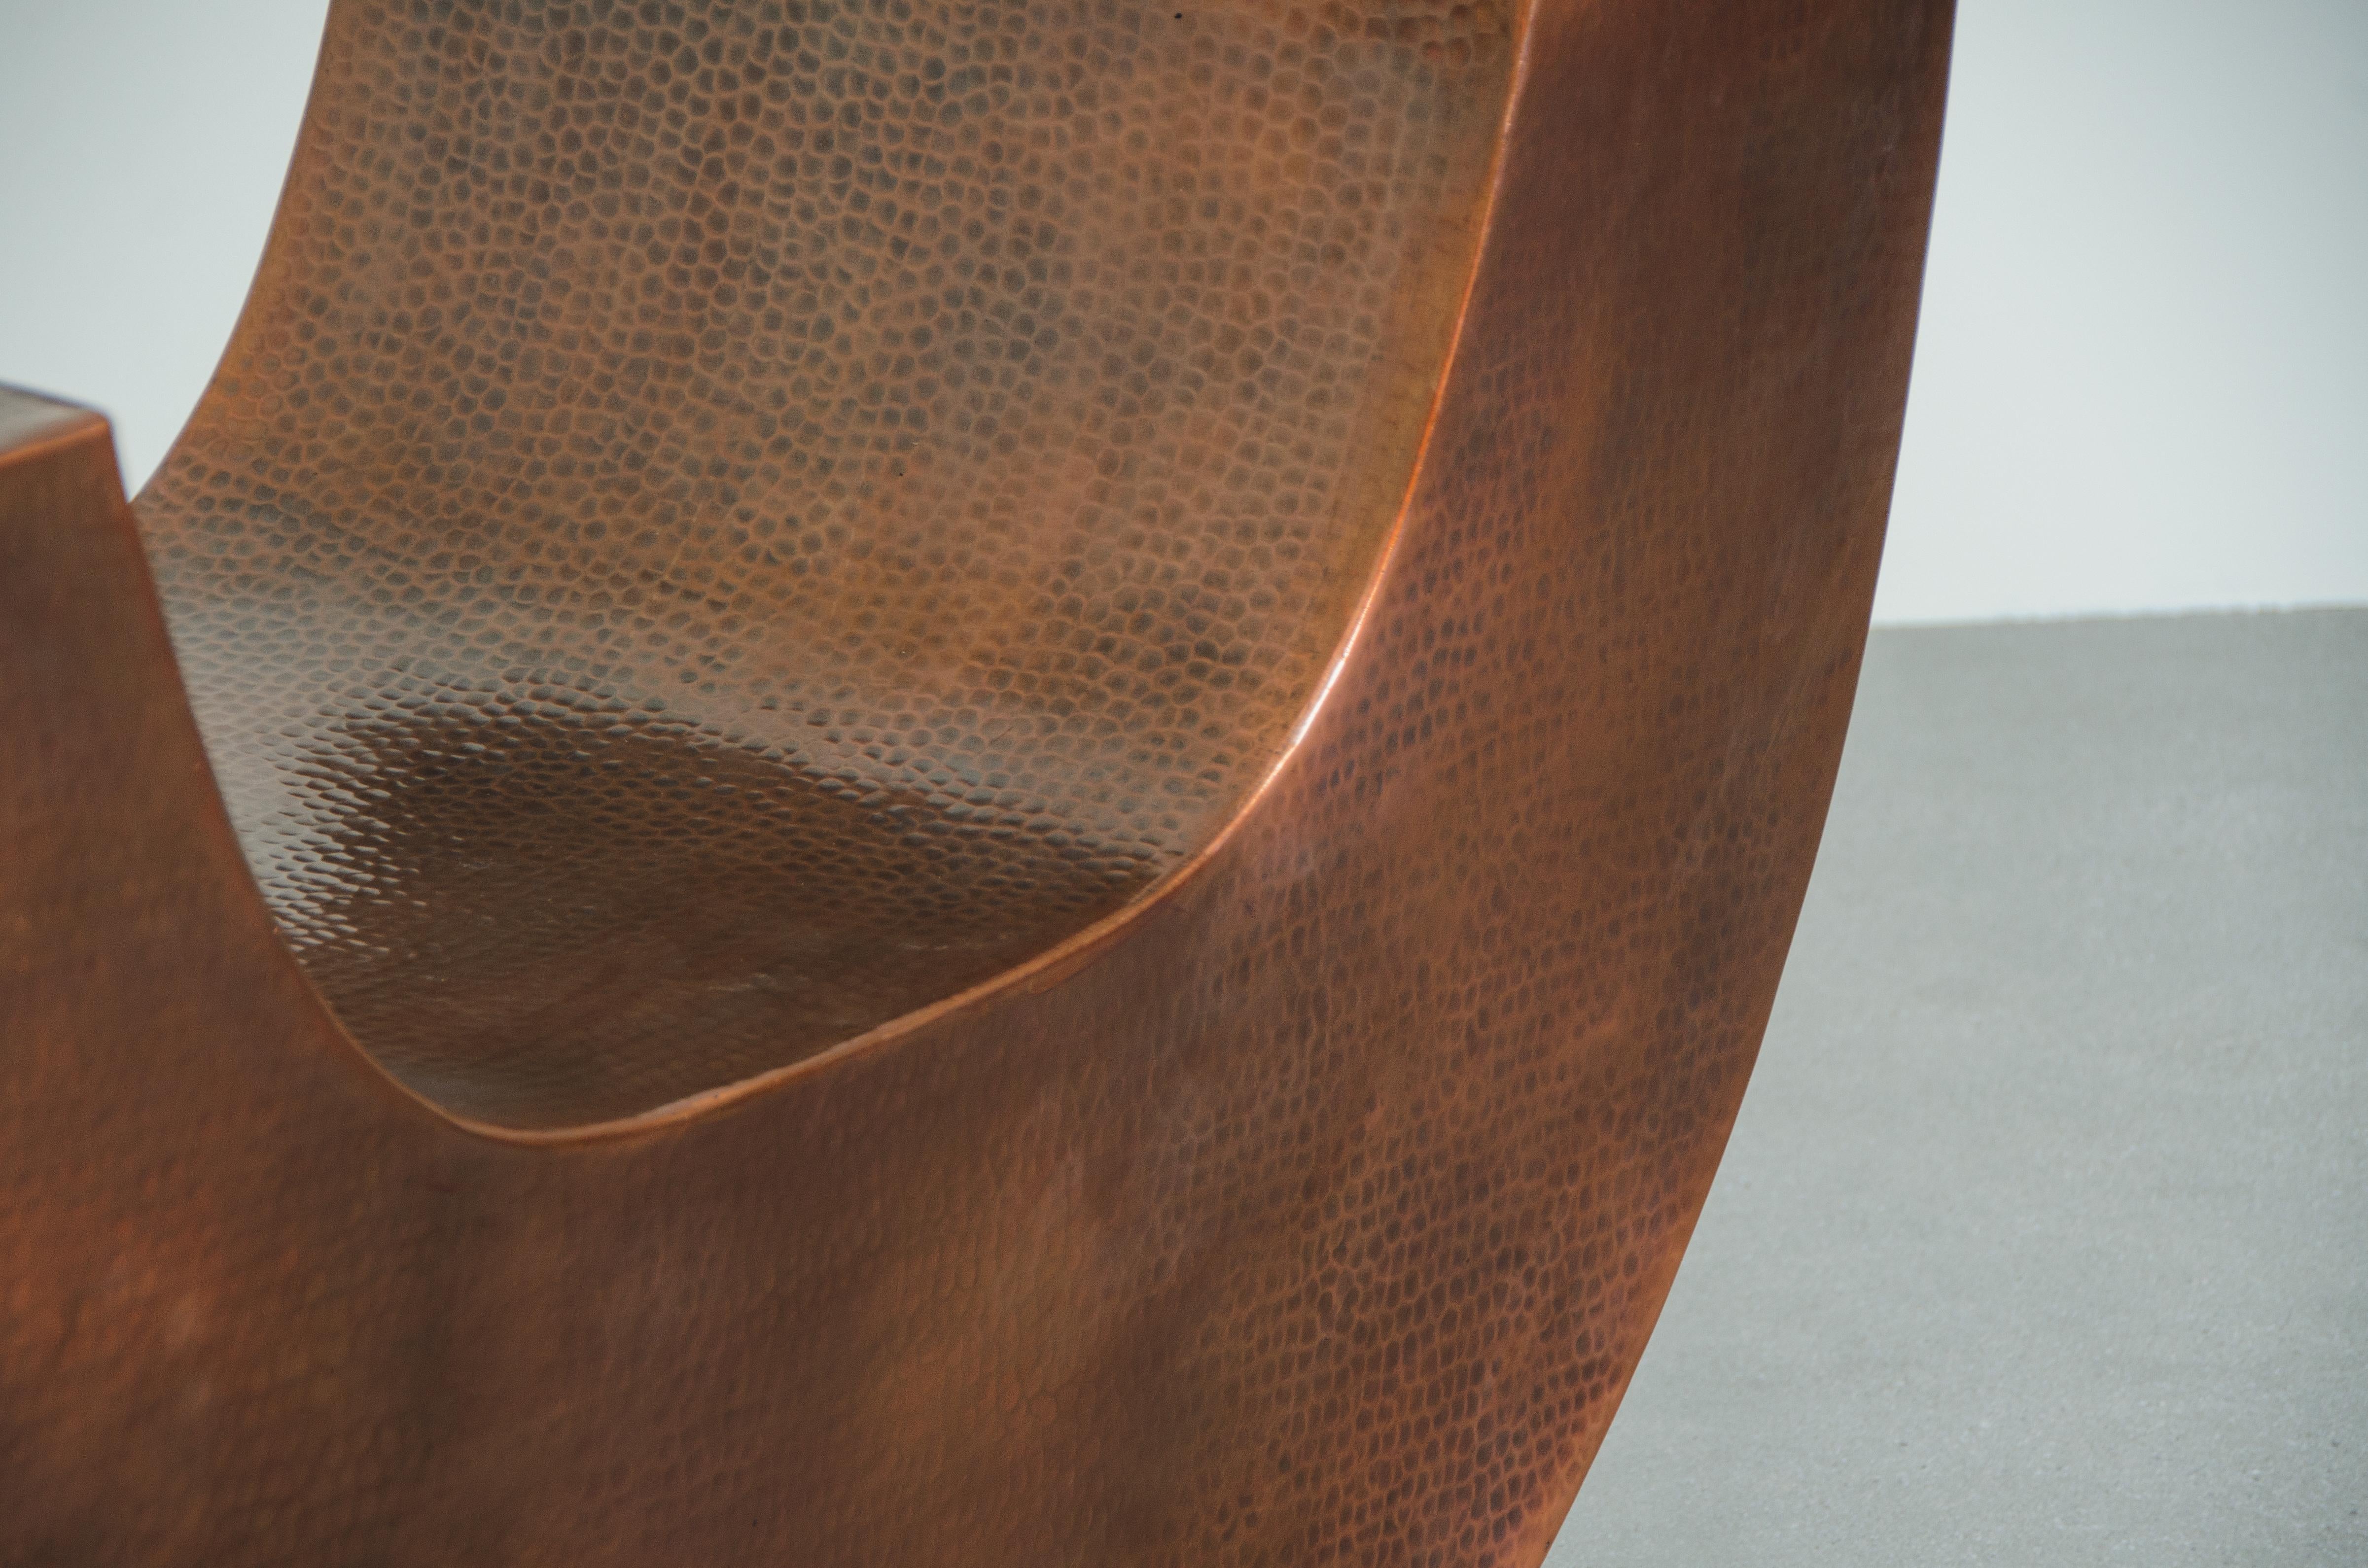 Contemporary Robert Kuo Repoussé Huang Chair in Antique Copper, Limited Edition For Sale 3